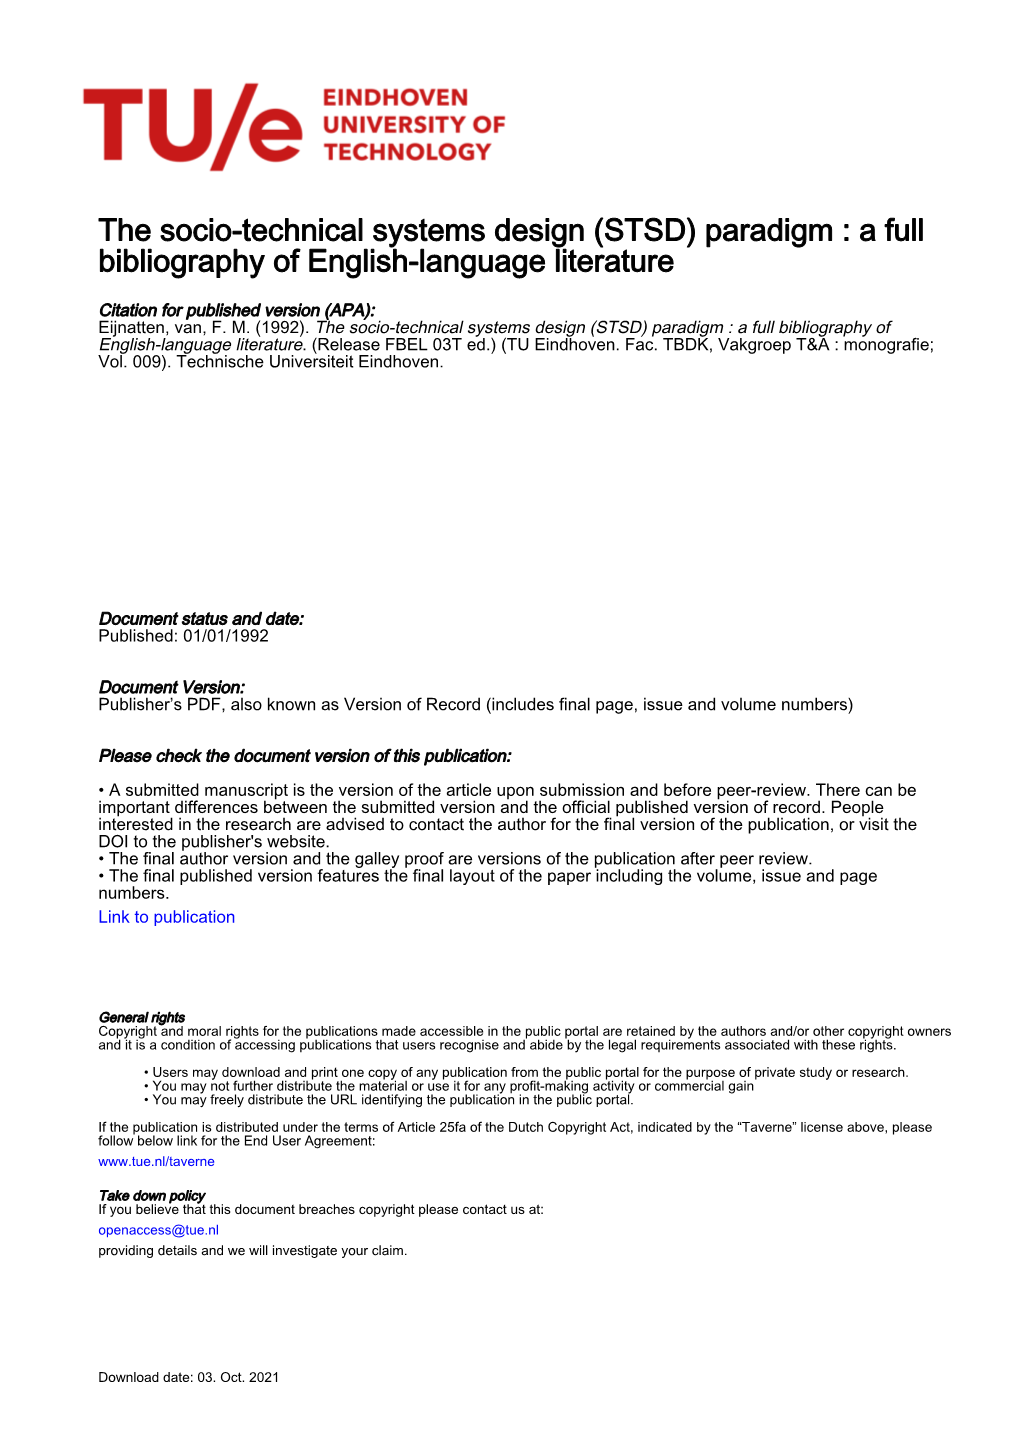 The Socio-Technical Systems Design (STSD) Paradigm : a Full Bibliography of English-Language Literature